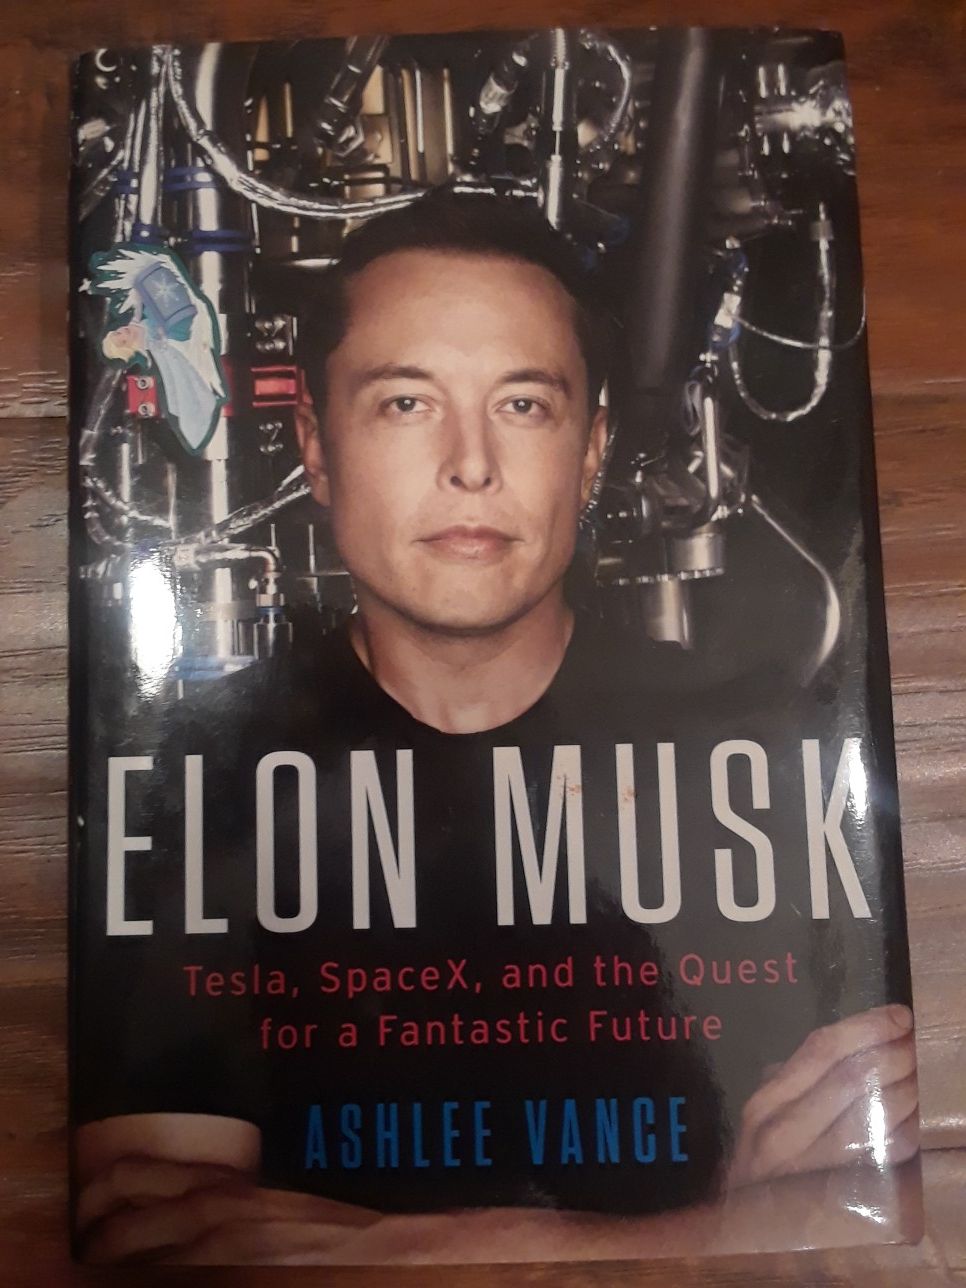 Elon Musk: Tesla, SpaceX, and the Quest for a Fantastic Future by Ashlee Vance hardcover book